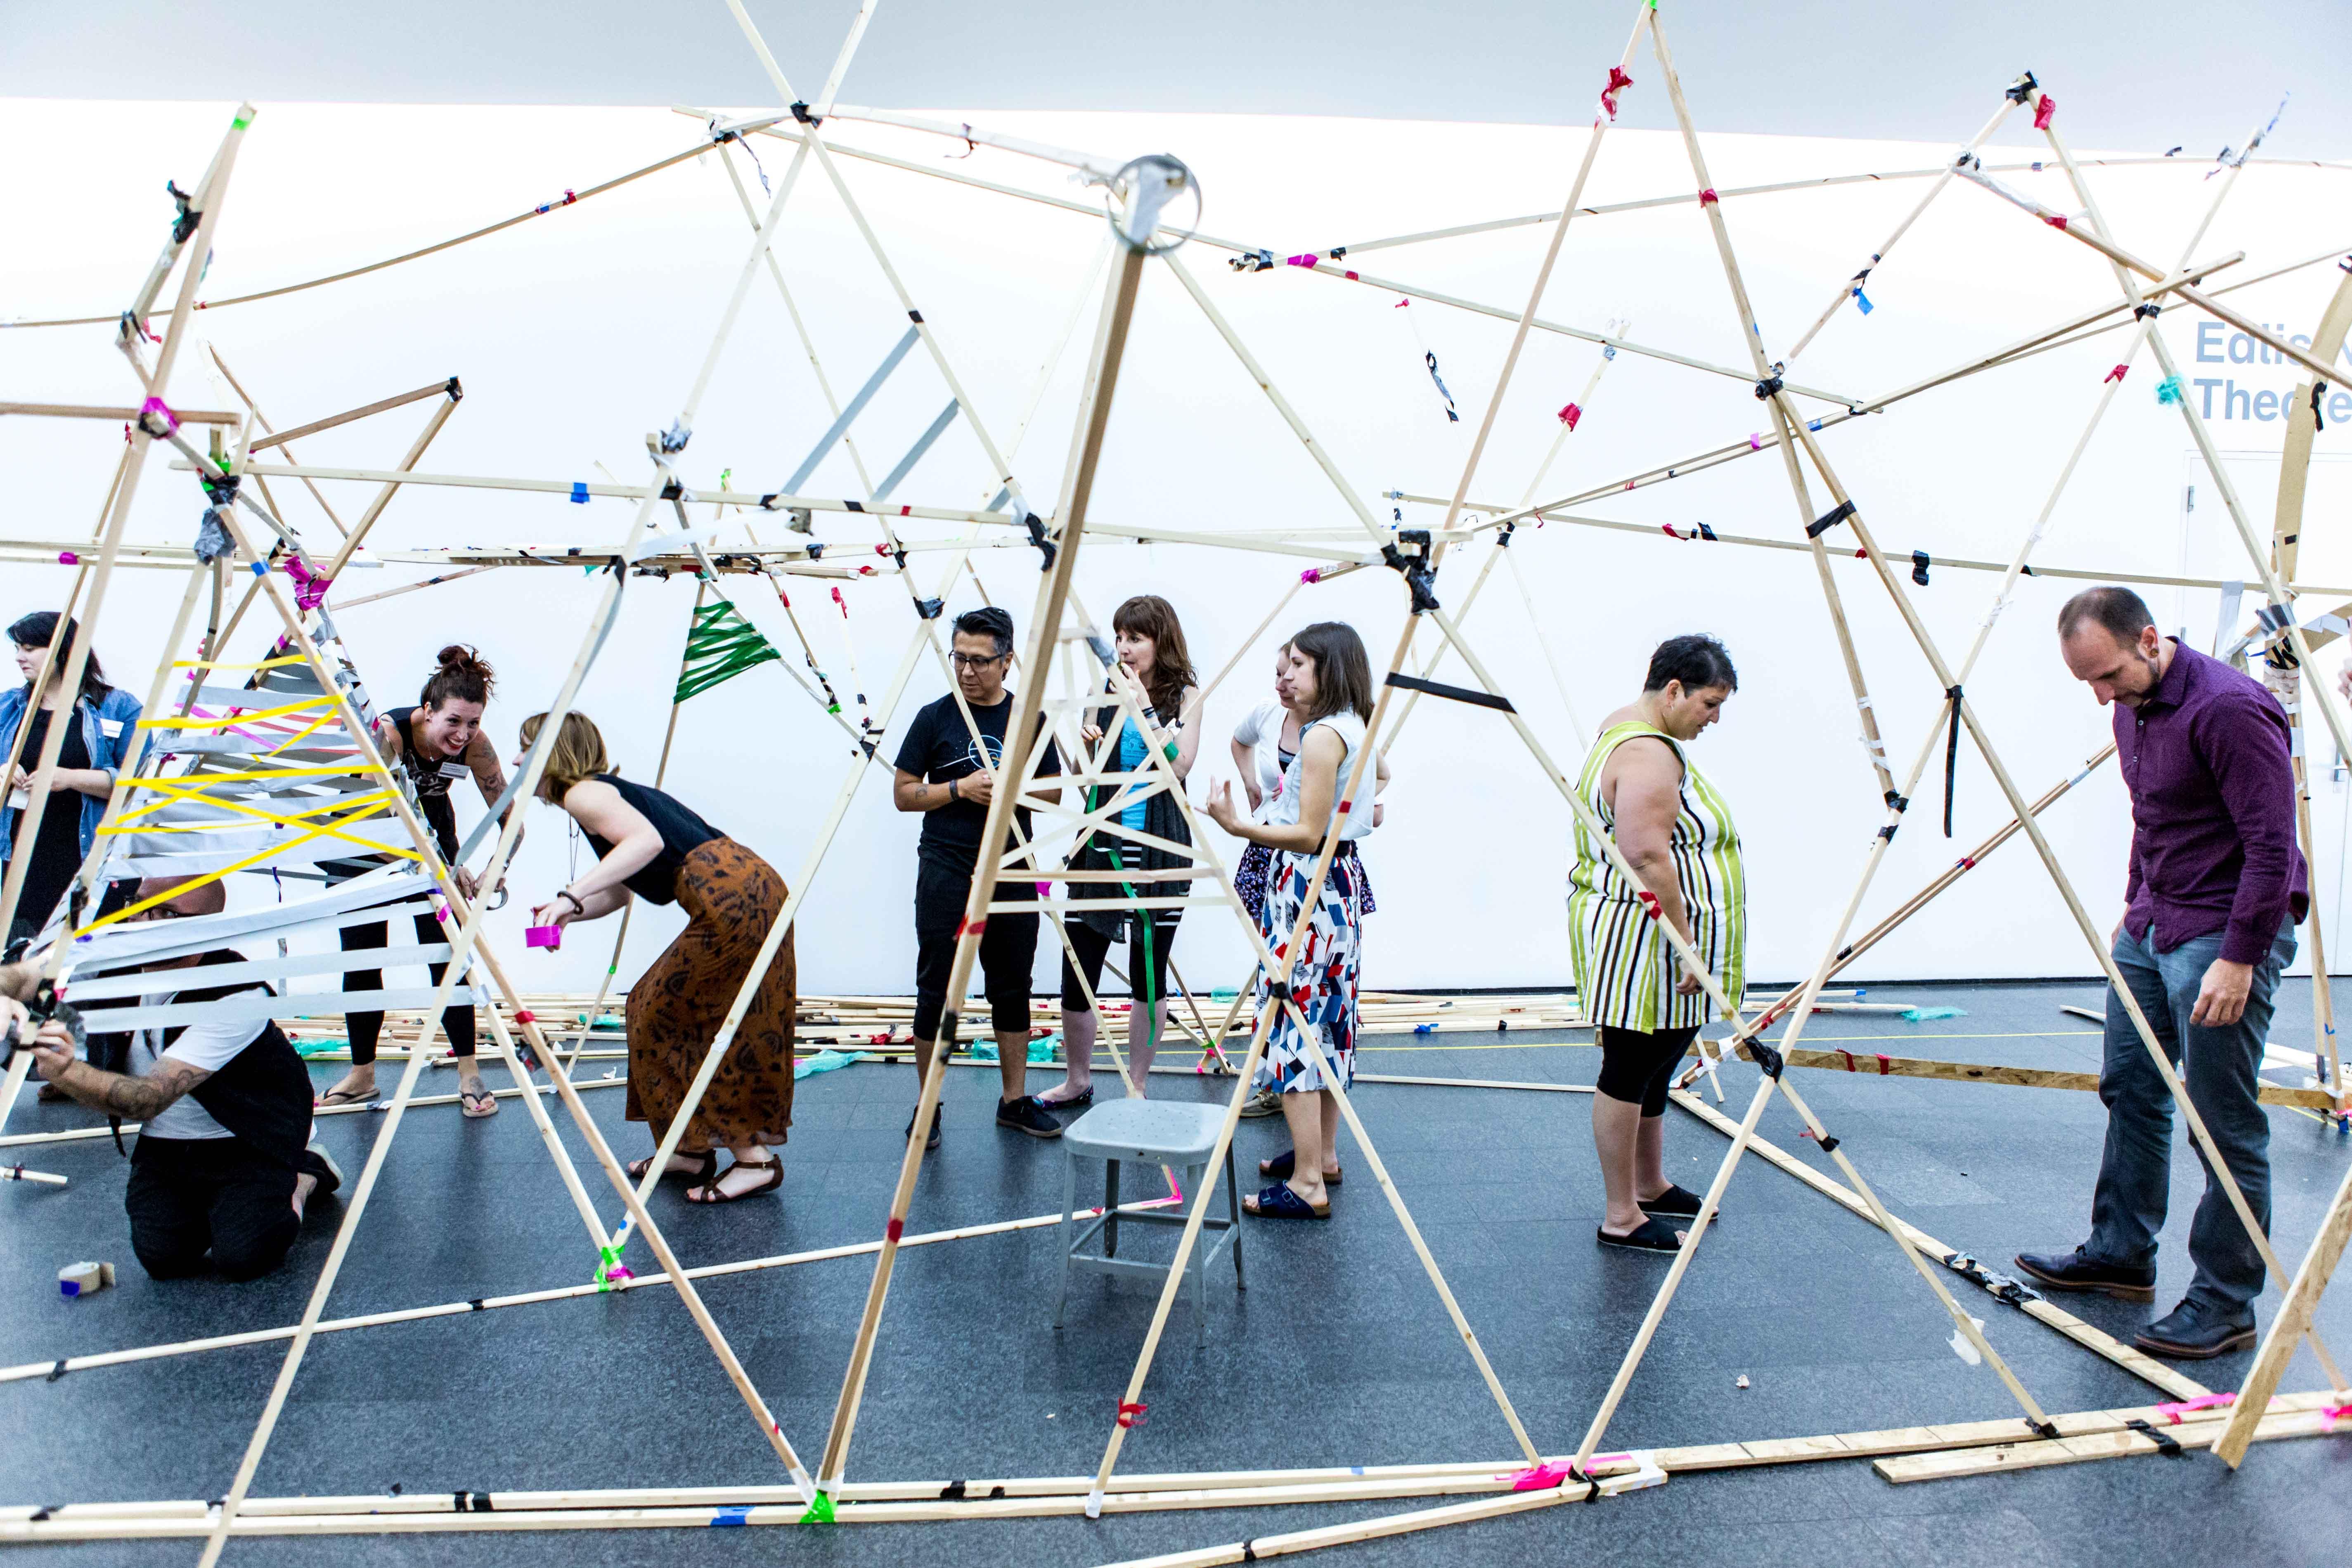 Adults standing in an open-air structure made with slender wooden beams and colorful tape